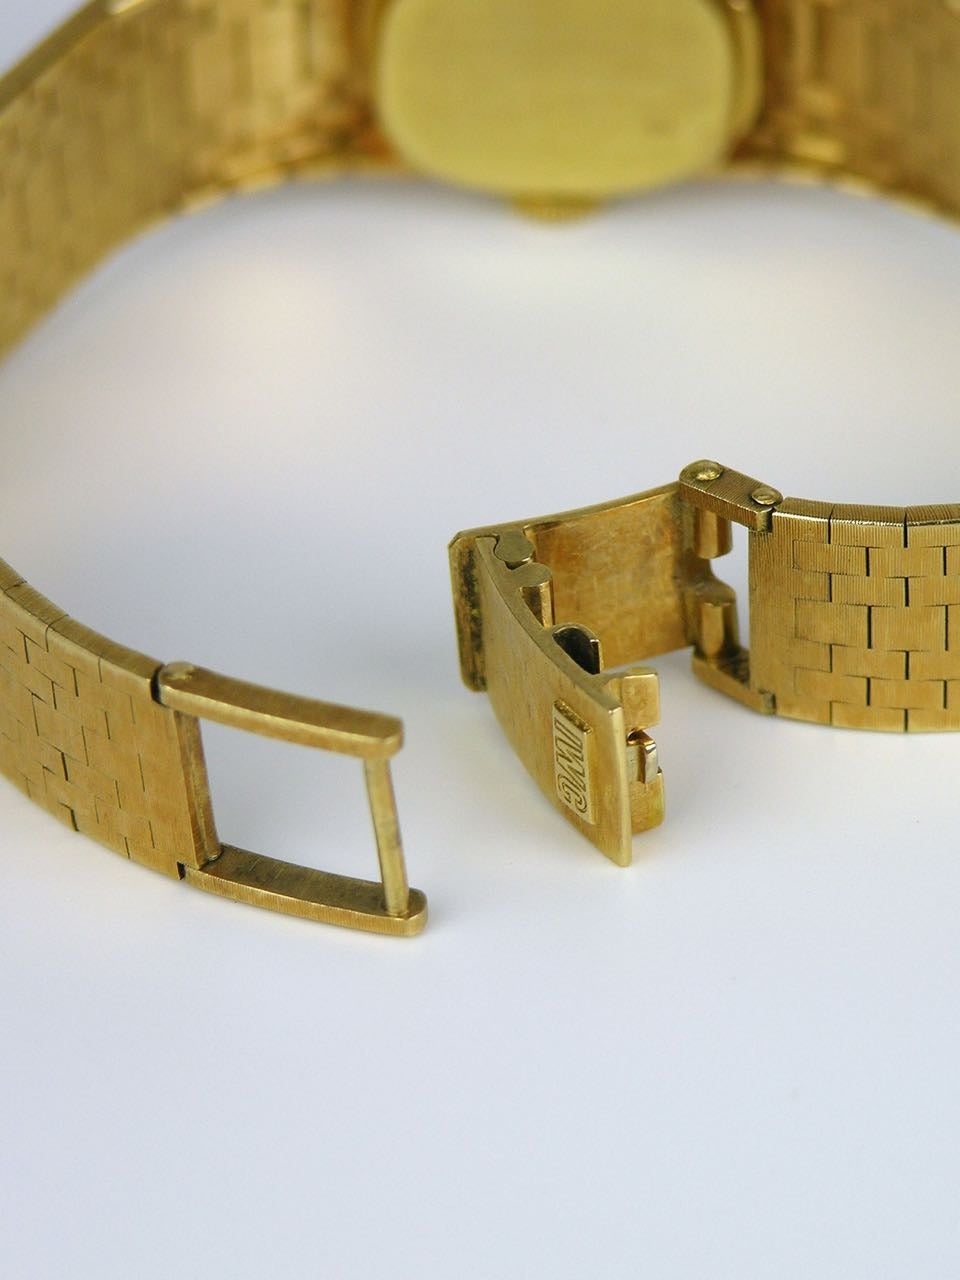 International Watch Company Lady's Yellow gold dress Wristwatch In Excellent Condition For Sale In Potts Point, New South Wales